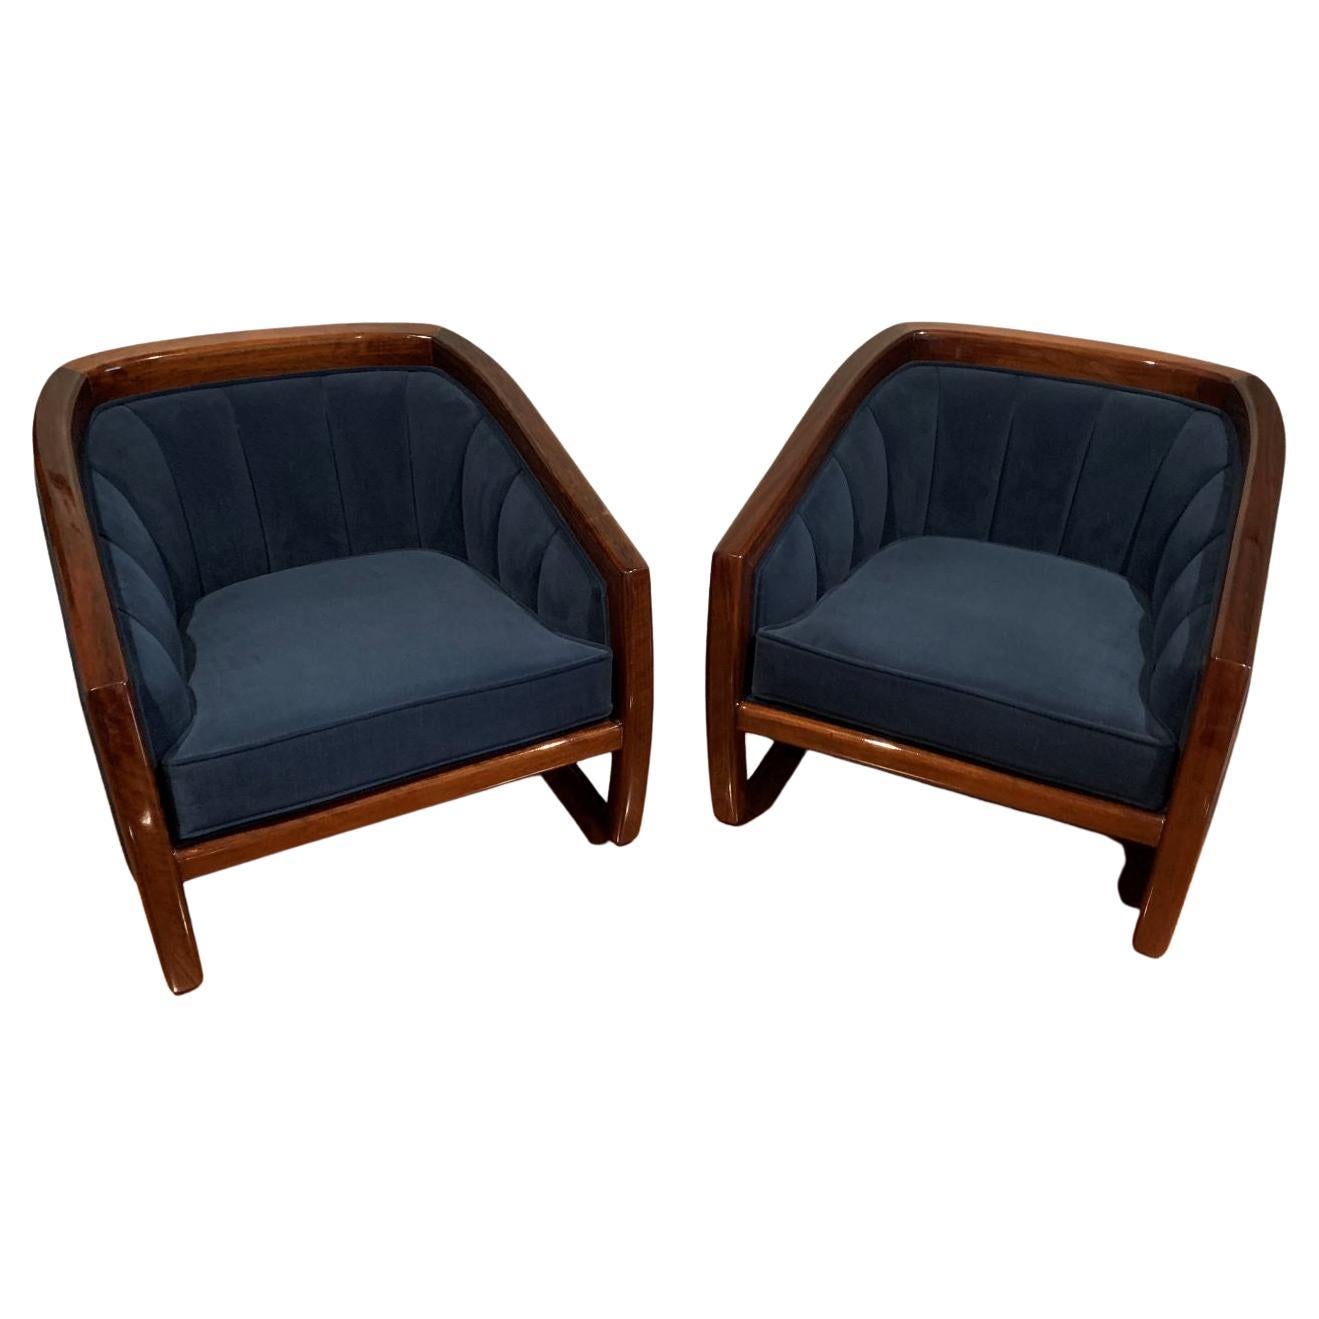 Pair of Mid Century Rosewood Tub Chairs in the Style of Milo Baughman, C.1950